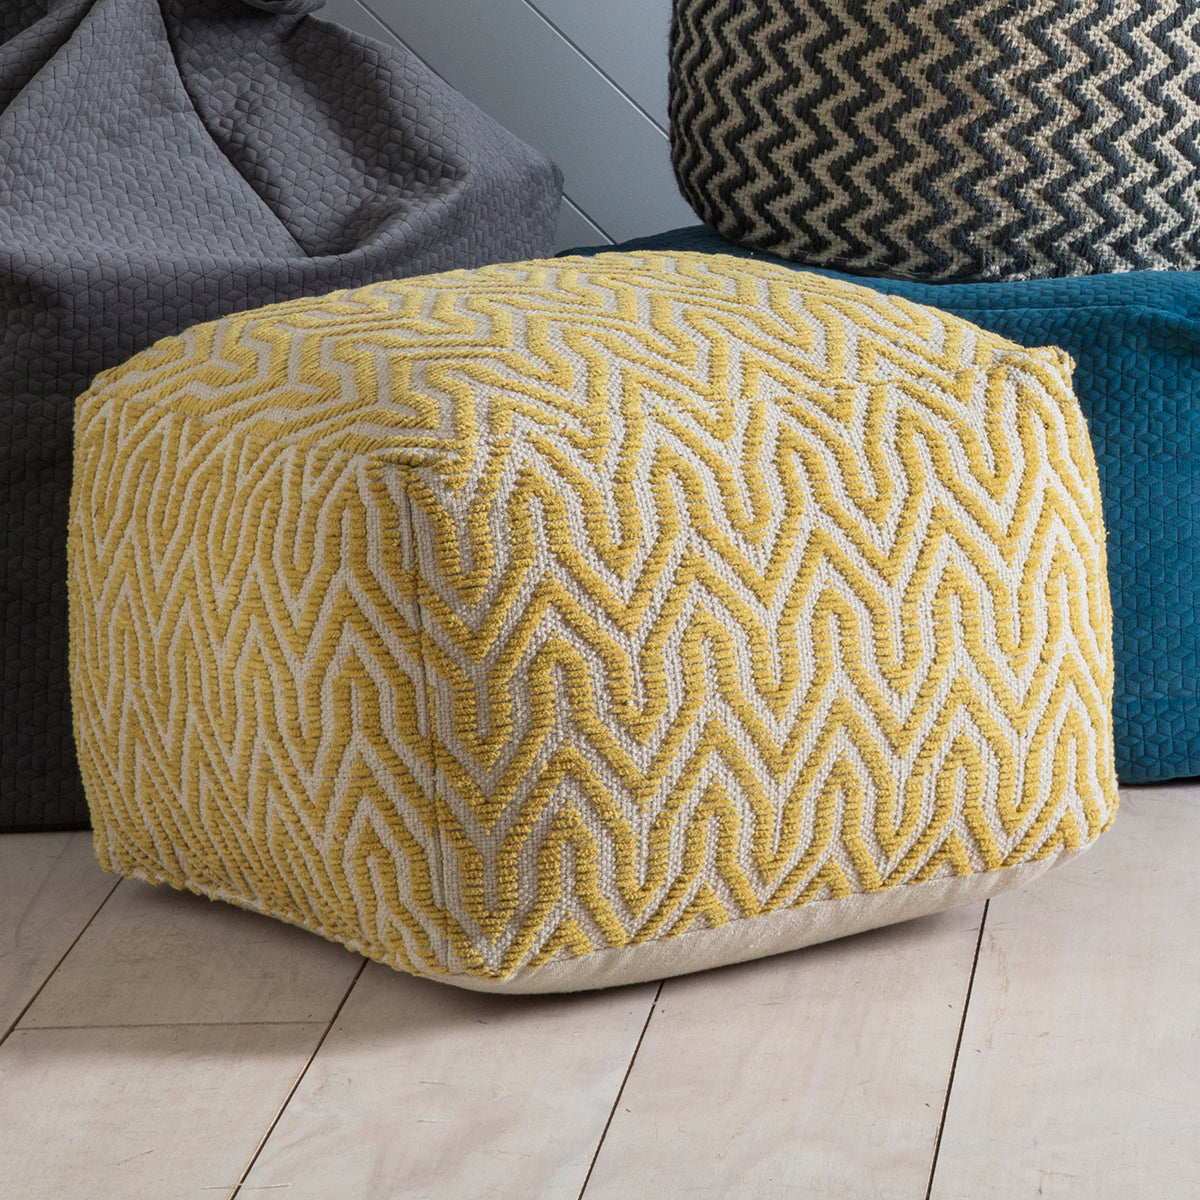 A Stromstad Pouffe Ochre sitting on a wooden floor, adding elegance to the interior decor of your home.